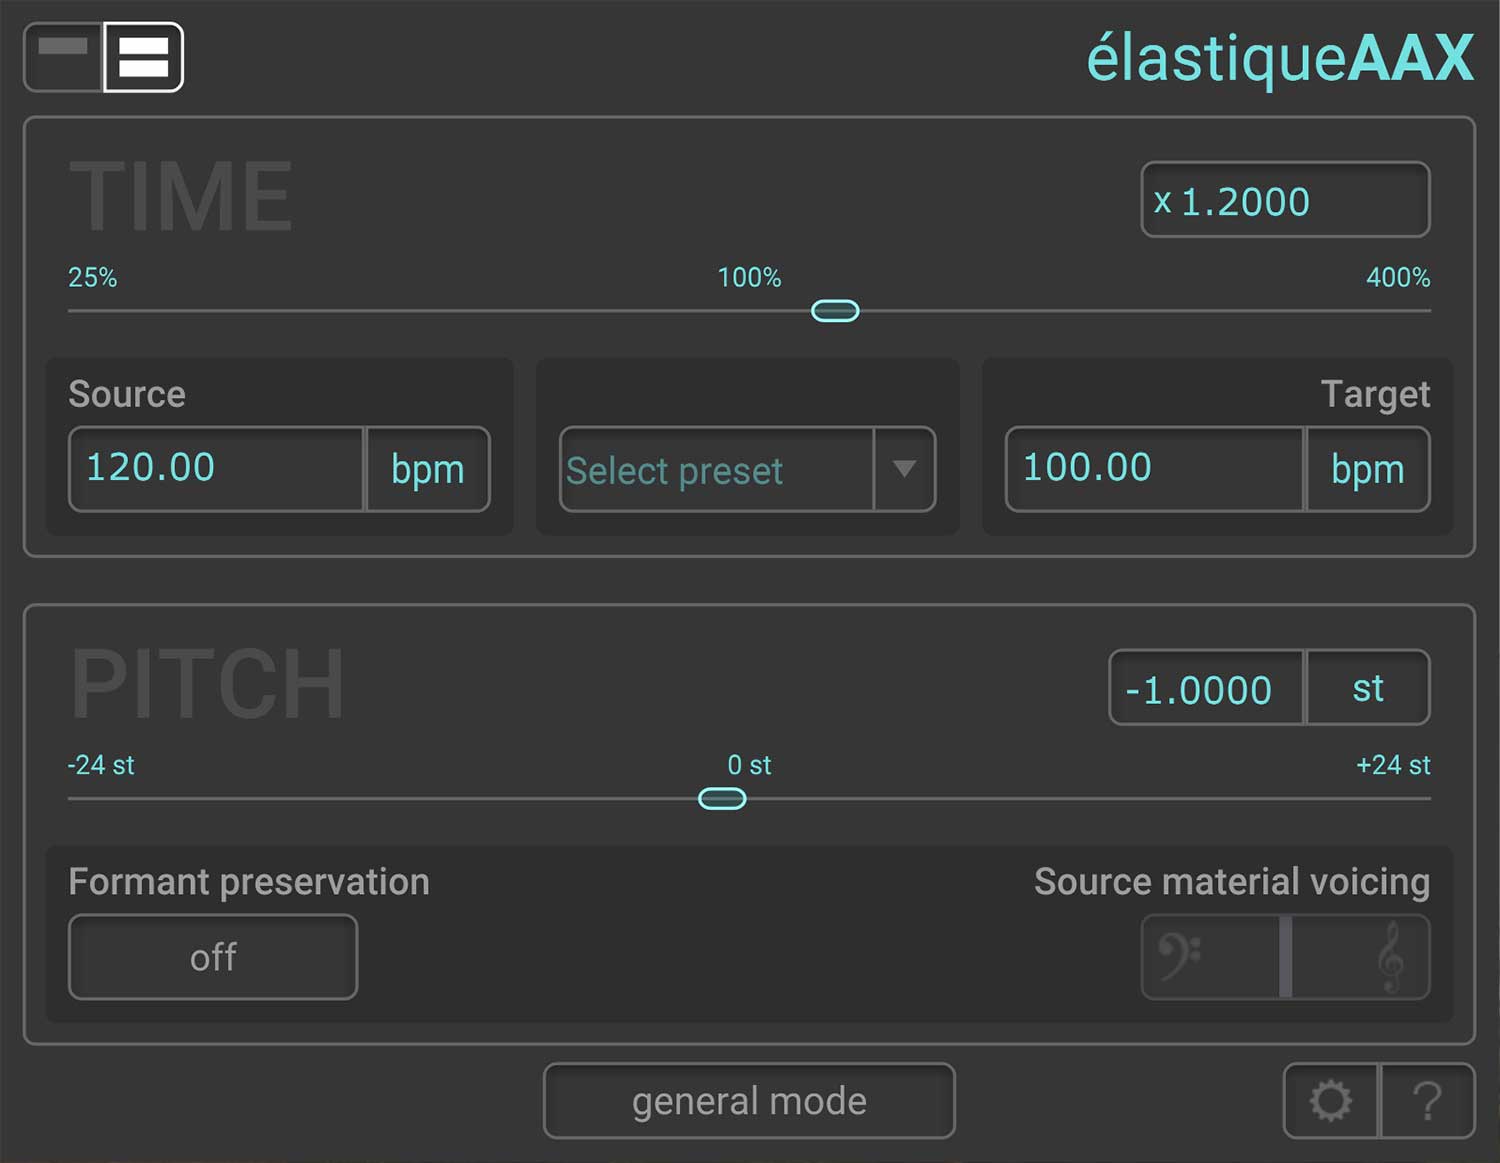 élastiqueAAX product image